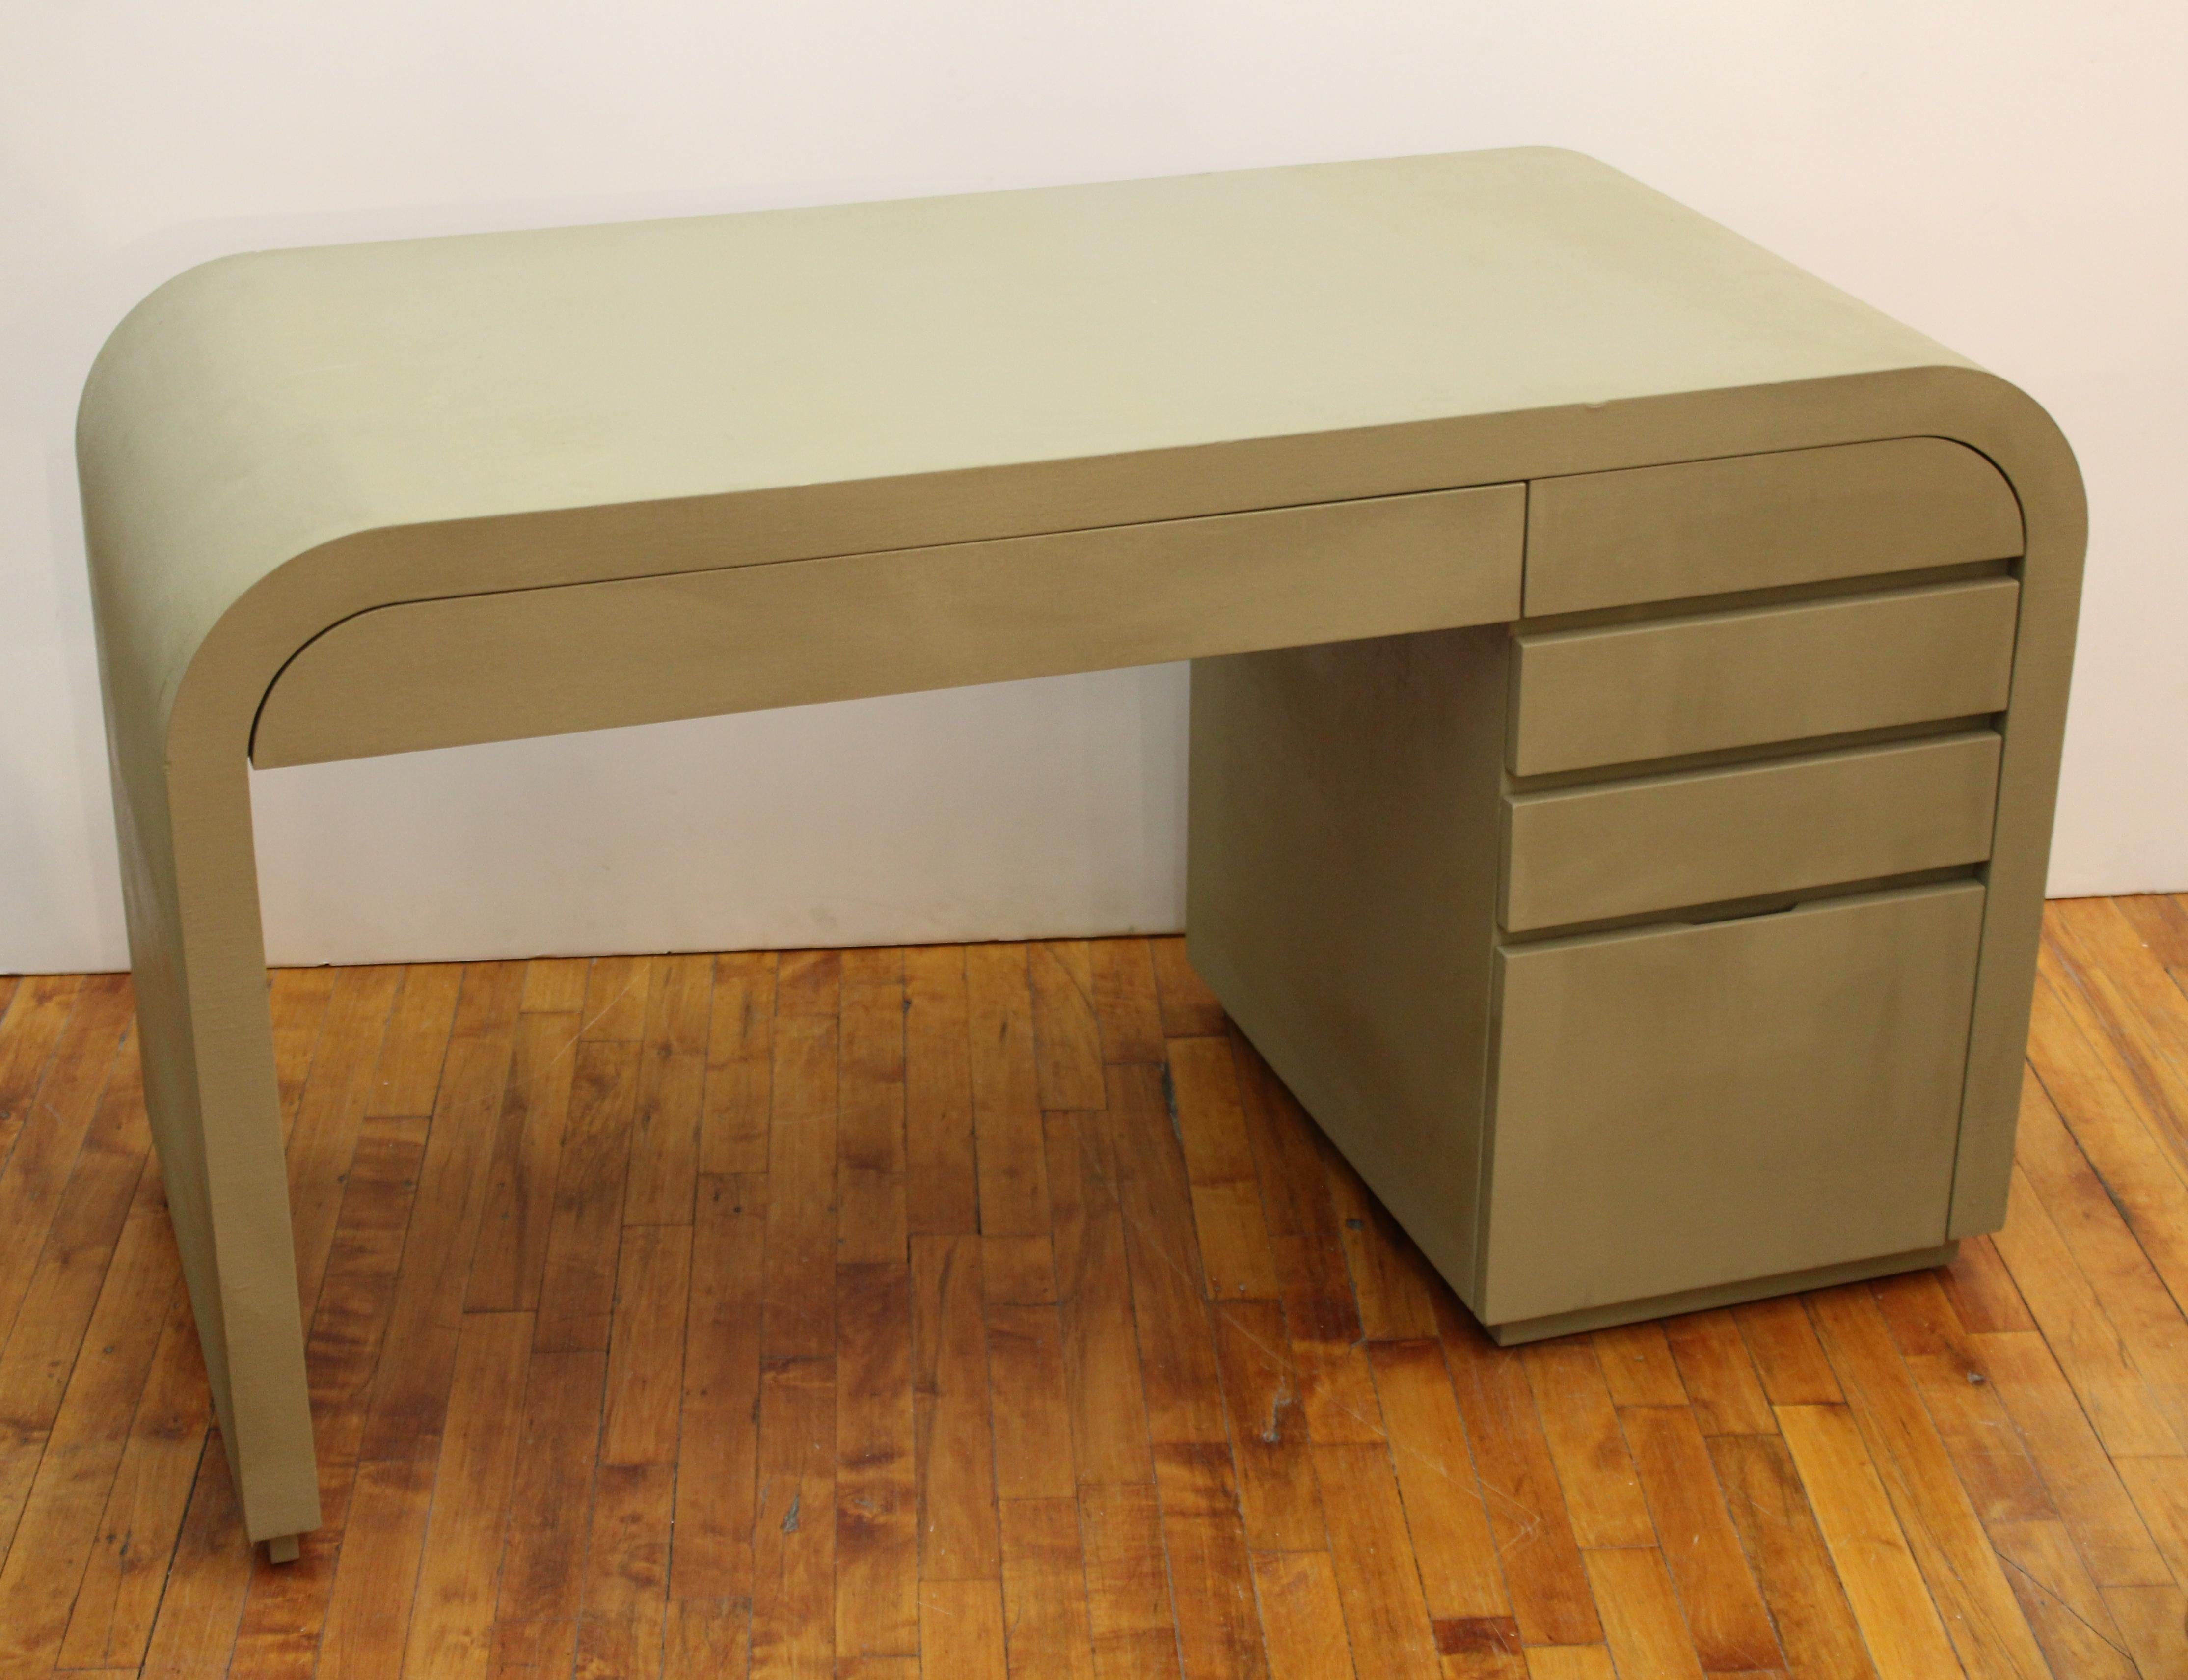 Postmodern work desk with grass-cloth surface, in the style of Karl Springer. The desk is designed in an Art Deco revival style and features waterfall edges on the sides. In great vintage condition with age-appropriate wear and use.